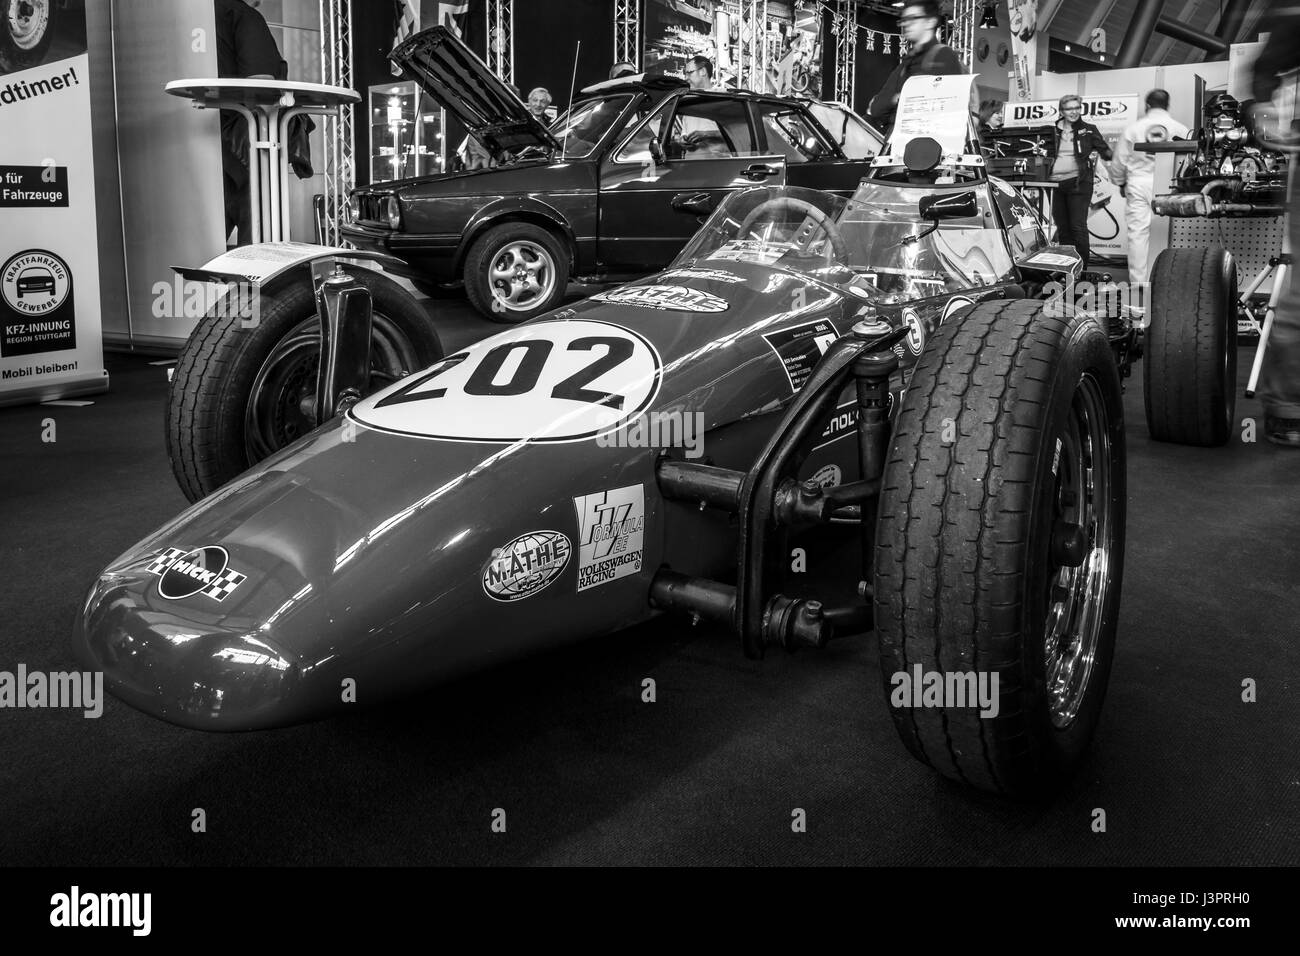 STUTTGART, GERMANY - MARCH 03, 2017: Formula Vee racing car (1965-1973). Black and white. Europe's greatest classic car exhibition 'RETRO CLASSICS' Stock Photo